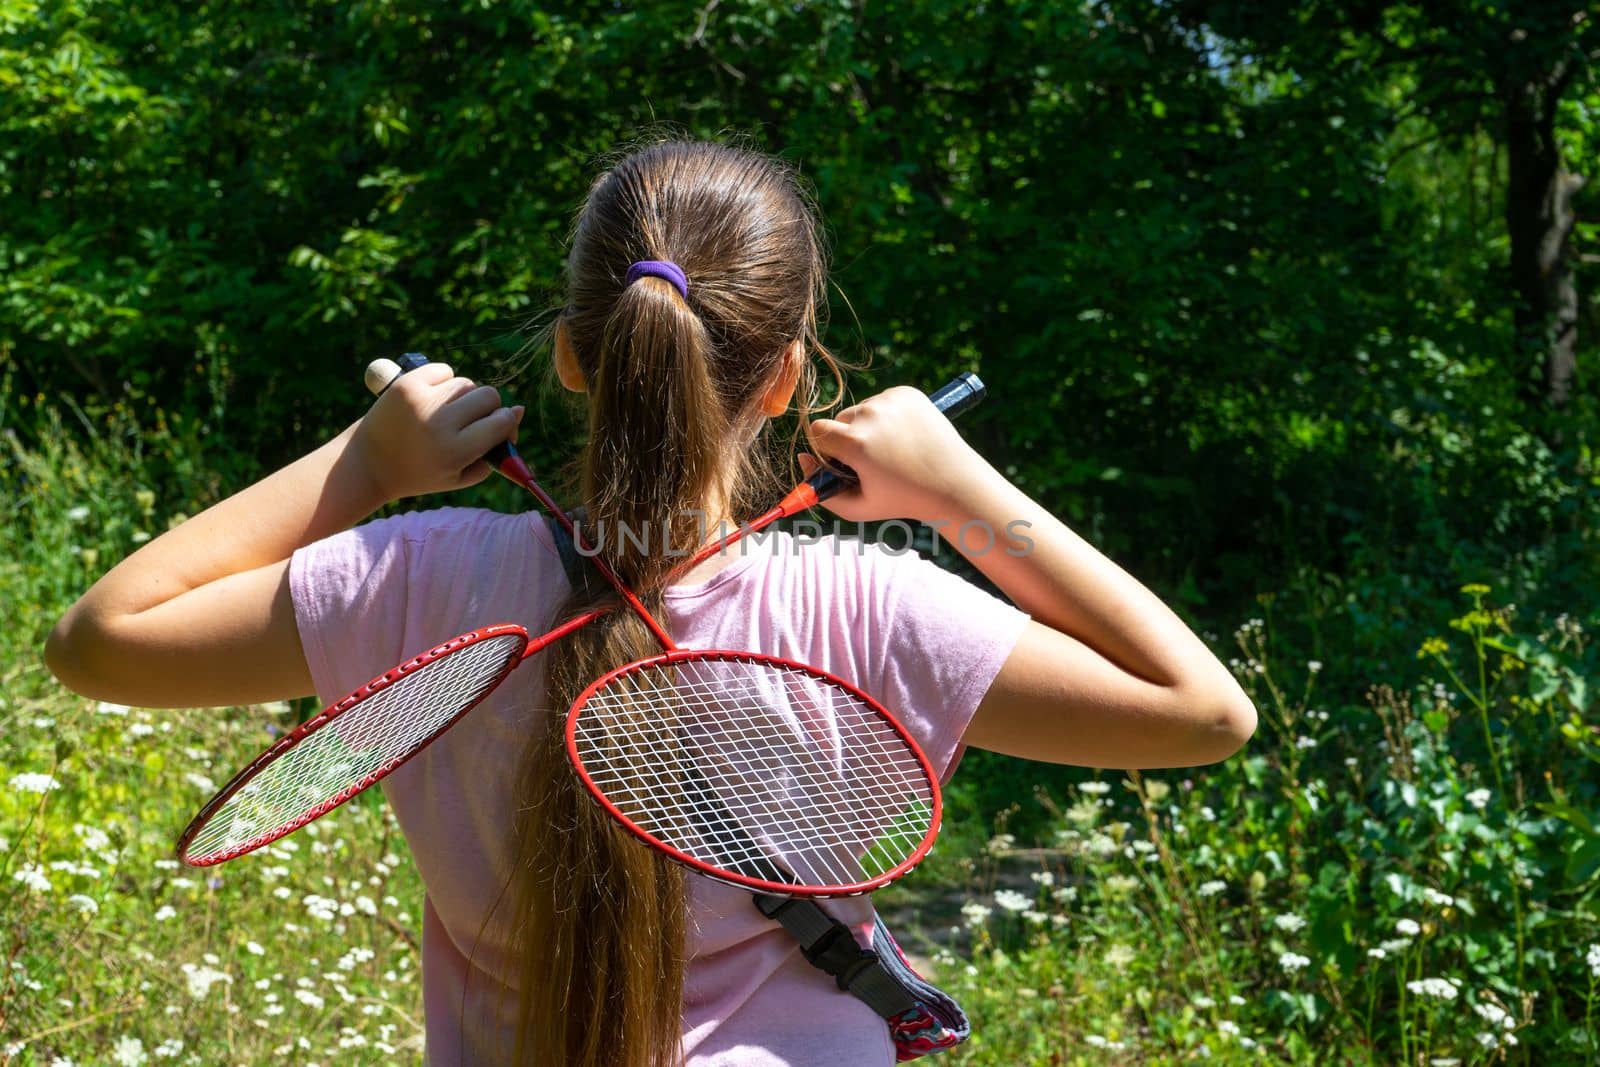 A girl stands in a forest clearing with two tennis rackets crossed on her back by Serhii_Voroshchuk